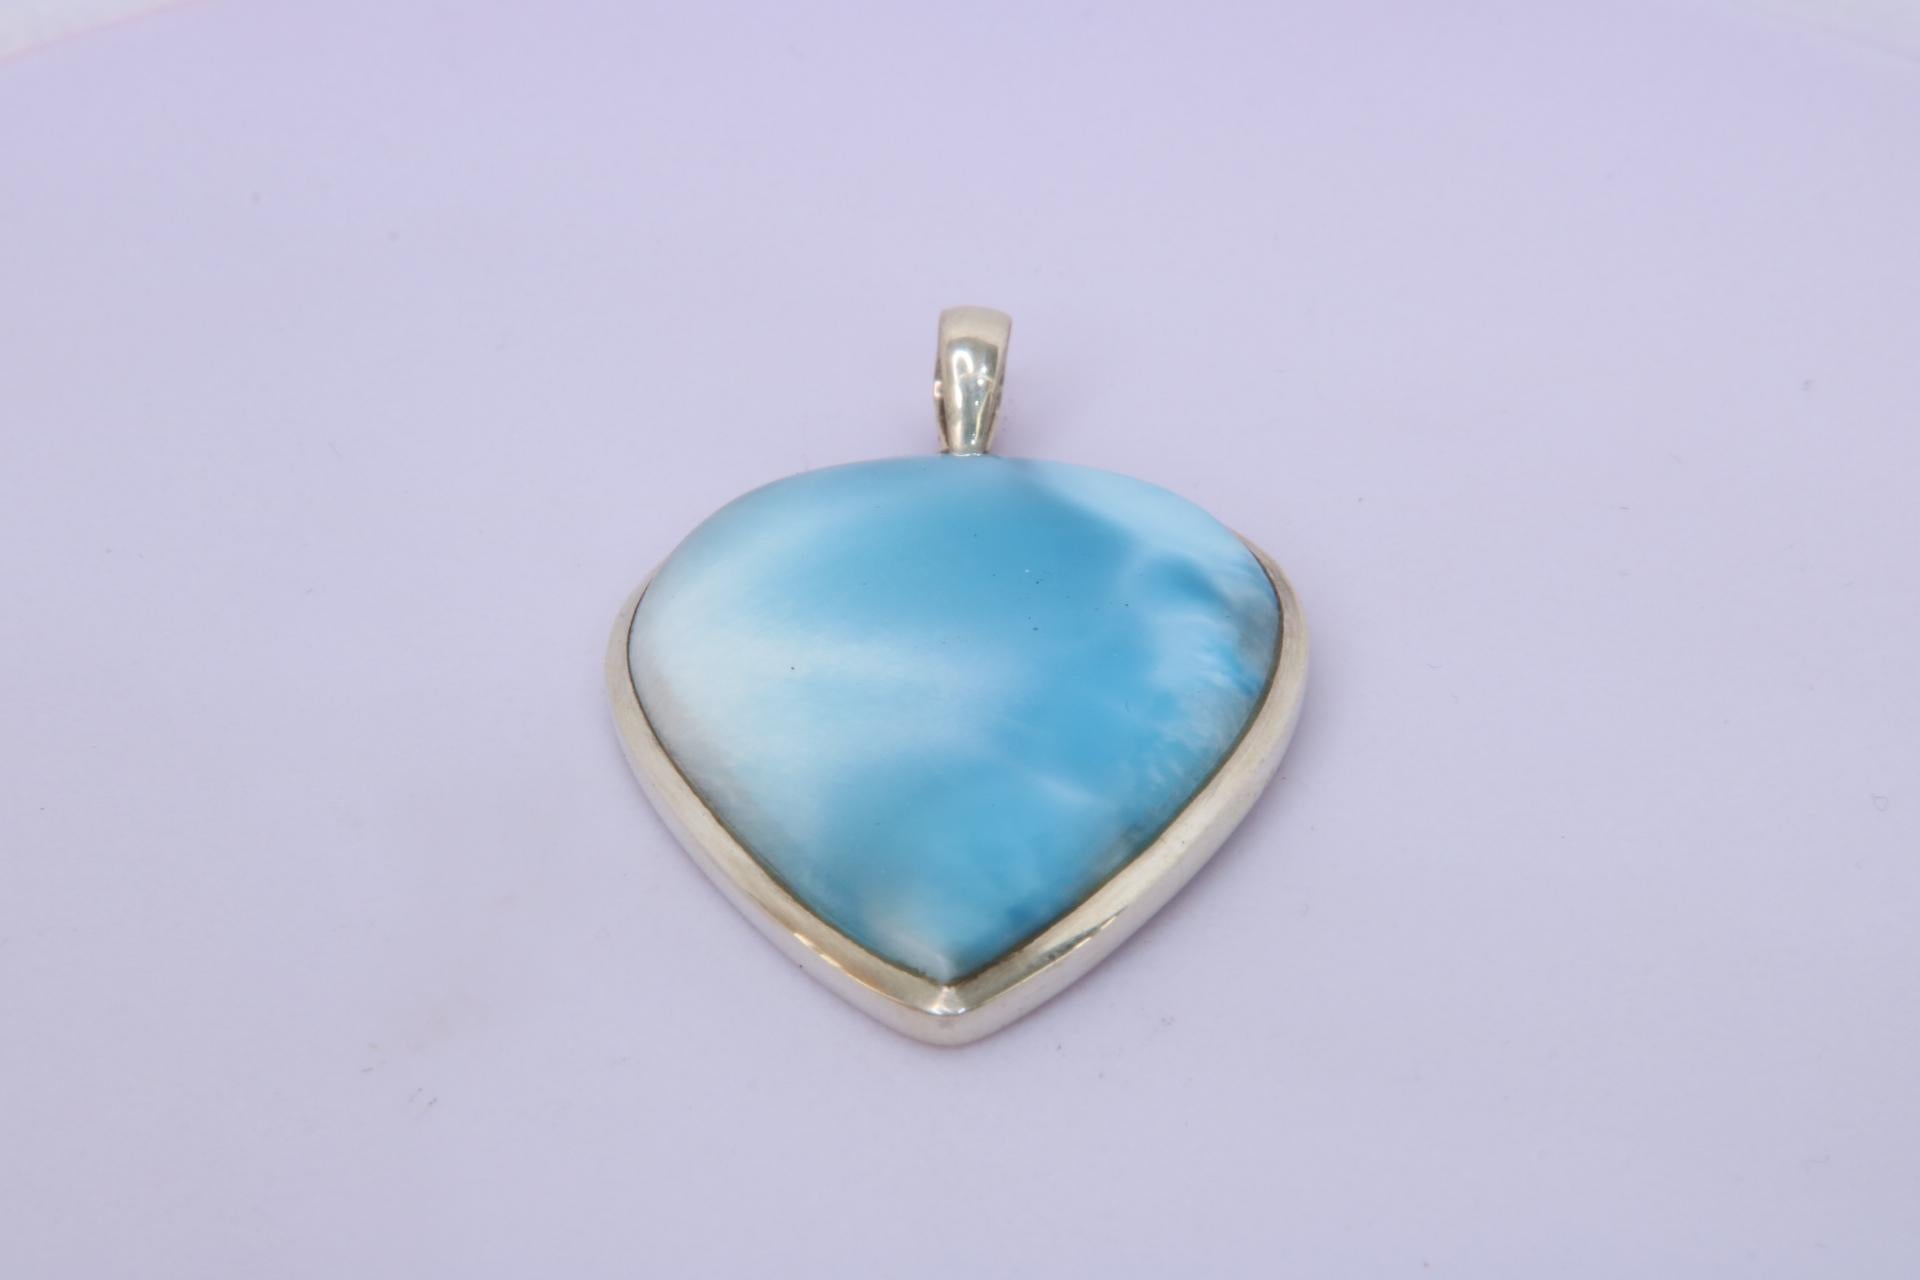 Handcrafted Sterling Silver Larimar Pendant.

Discover the enchanting allure of Larimar, the rare gemstone exclusively from the Dominican Republic. Known as the 